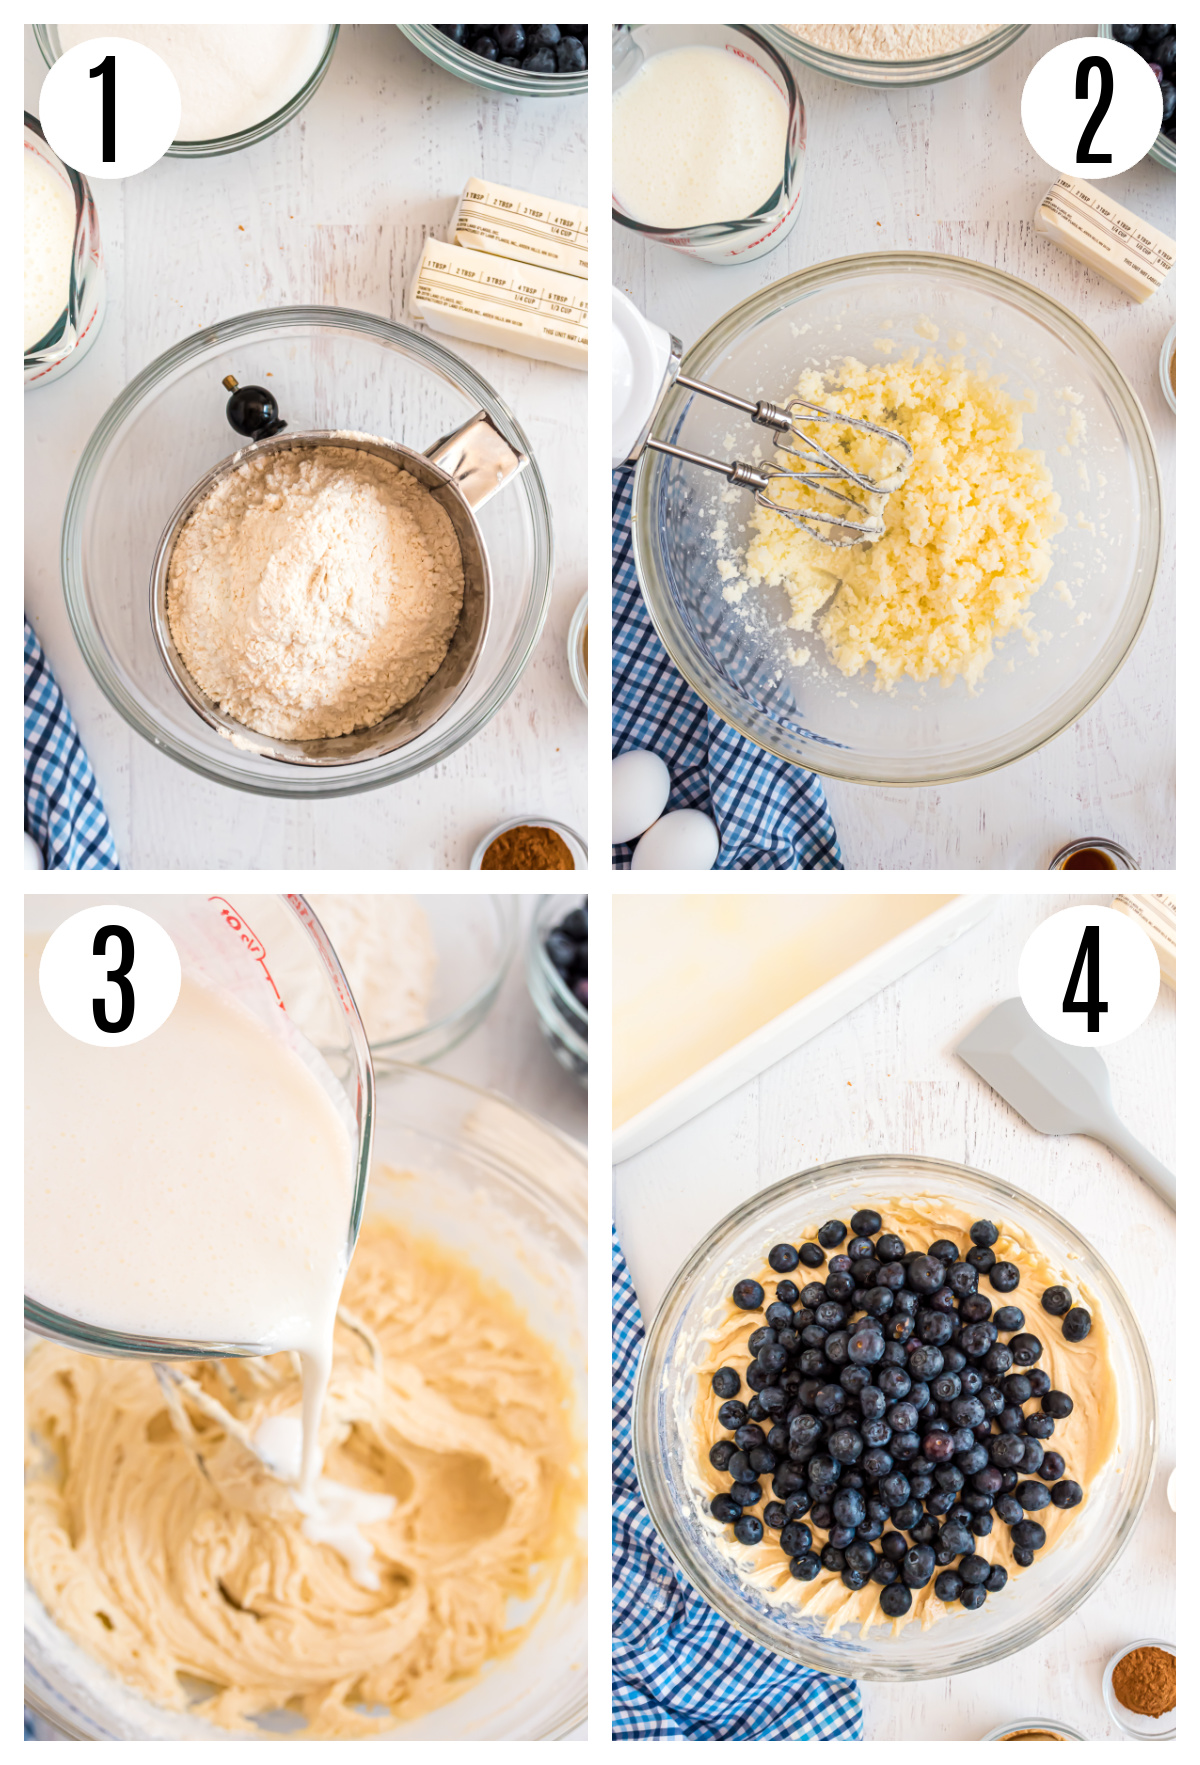 The first four steps in making the Blueberry Buttermilk Coffee Cake Recipe with Crumb Topping include:
sifting the flour, baking powder, soda, and salt together, beating the butter and sugar together, adding the milk and flour mixture, and folding in the blueberries.